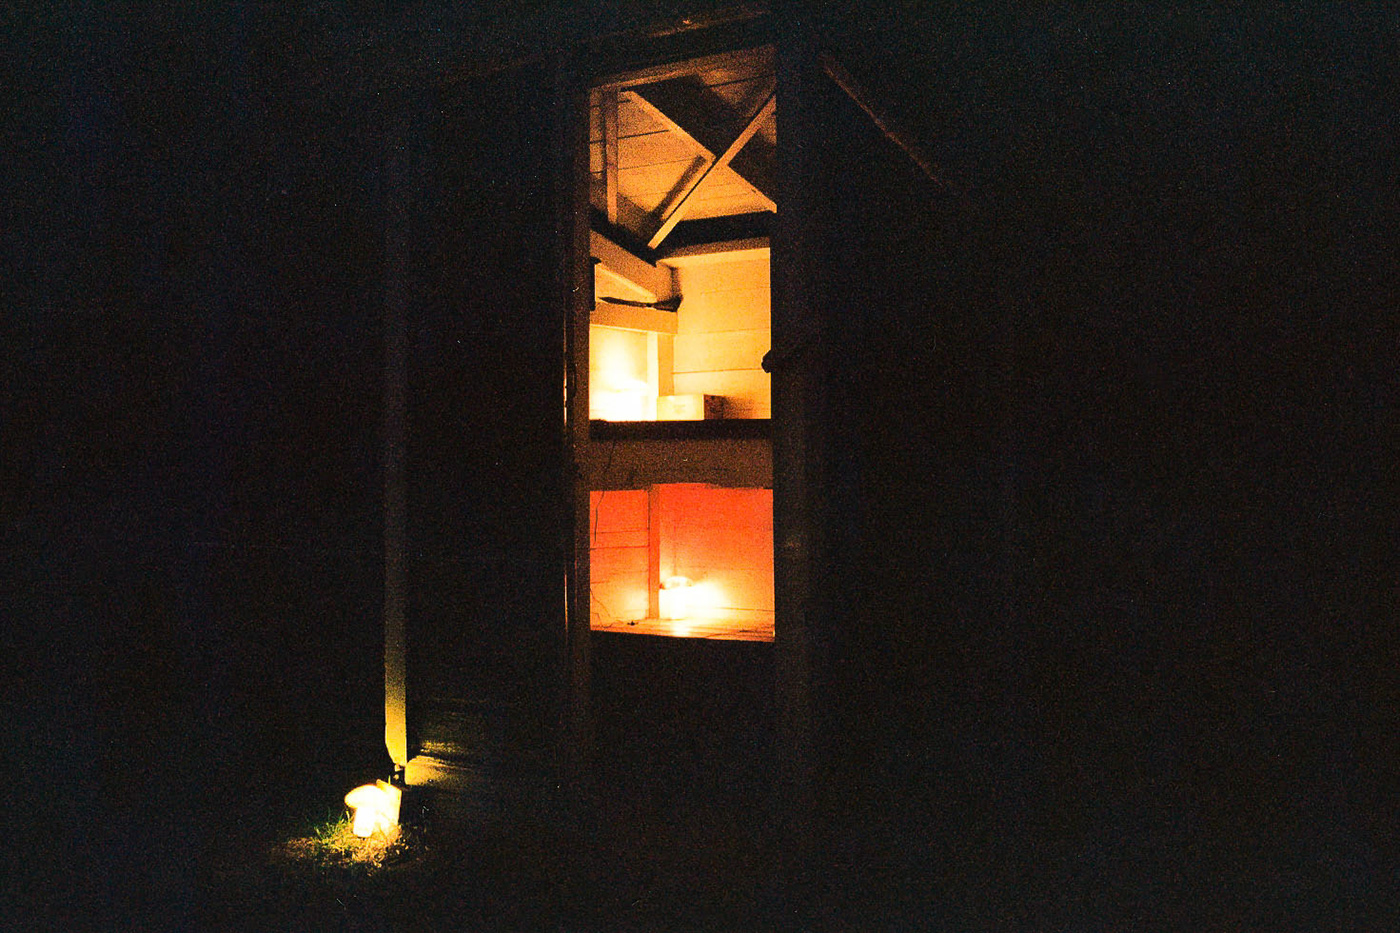 35mm film photography outhouse